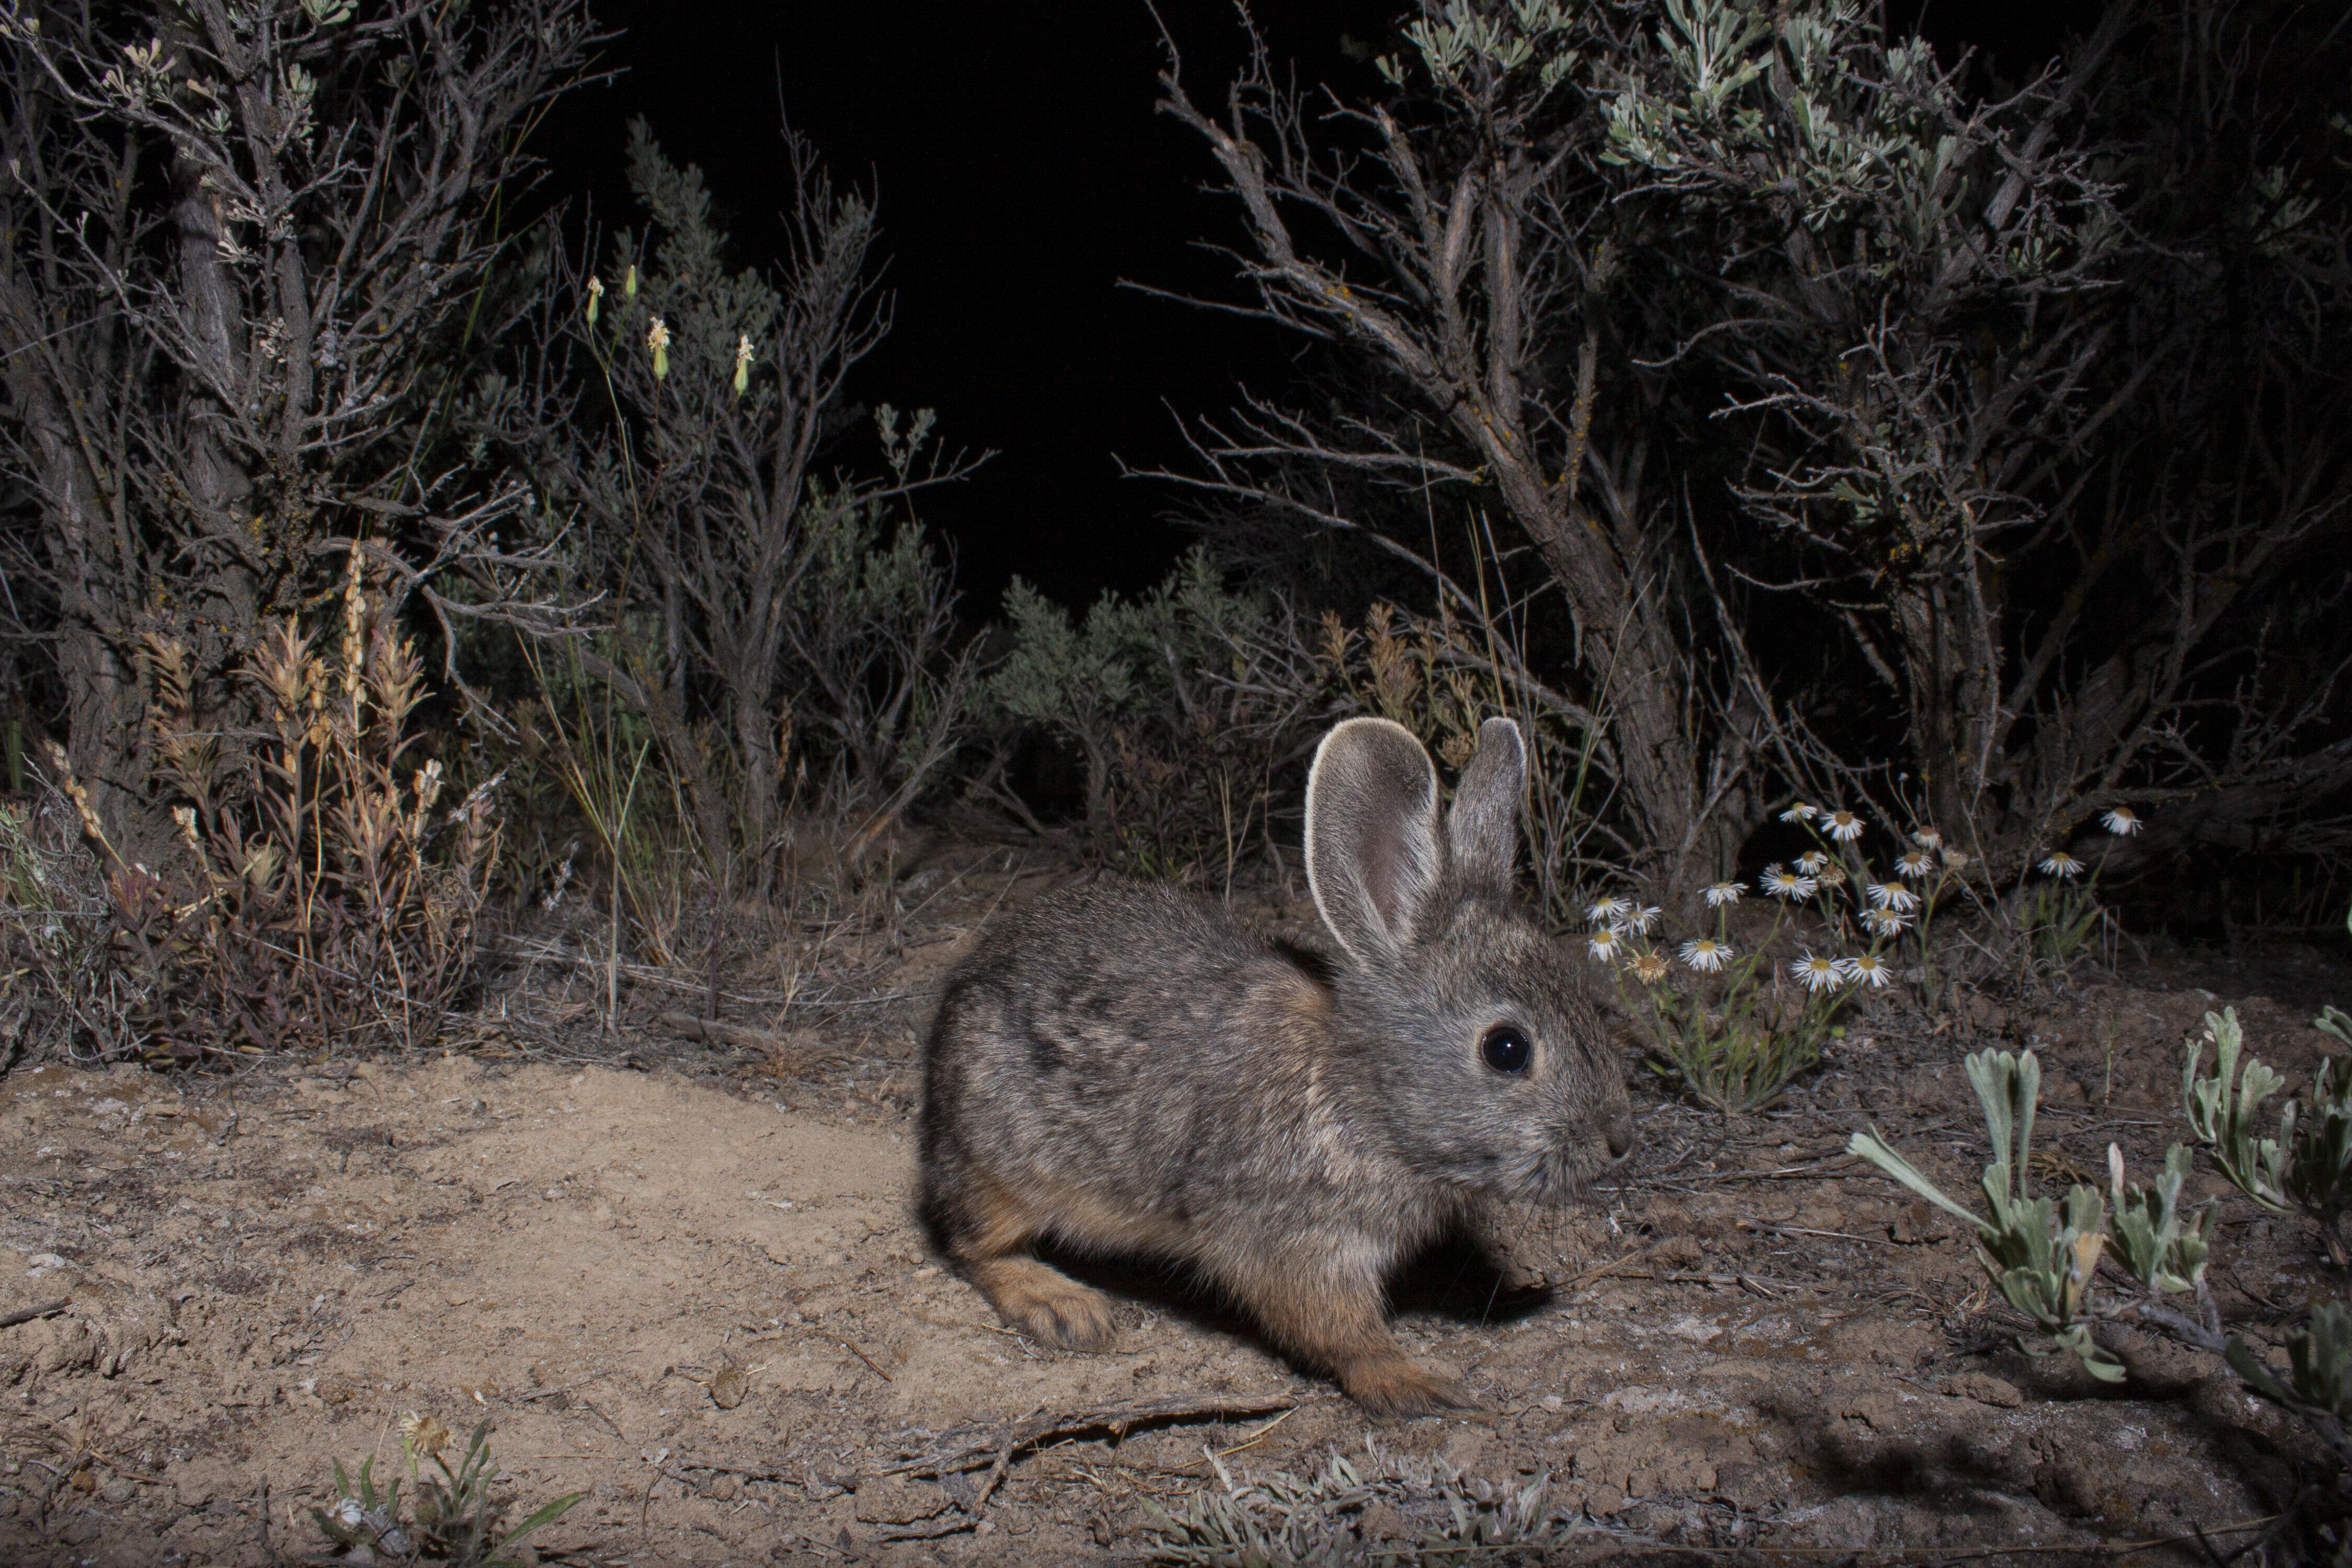 A pygmy rabbit stands on the ground as a hidden camera takes a photograph at night. 